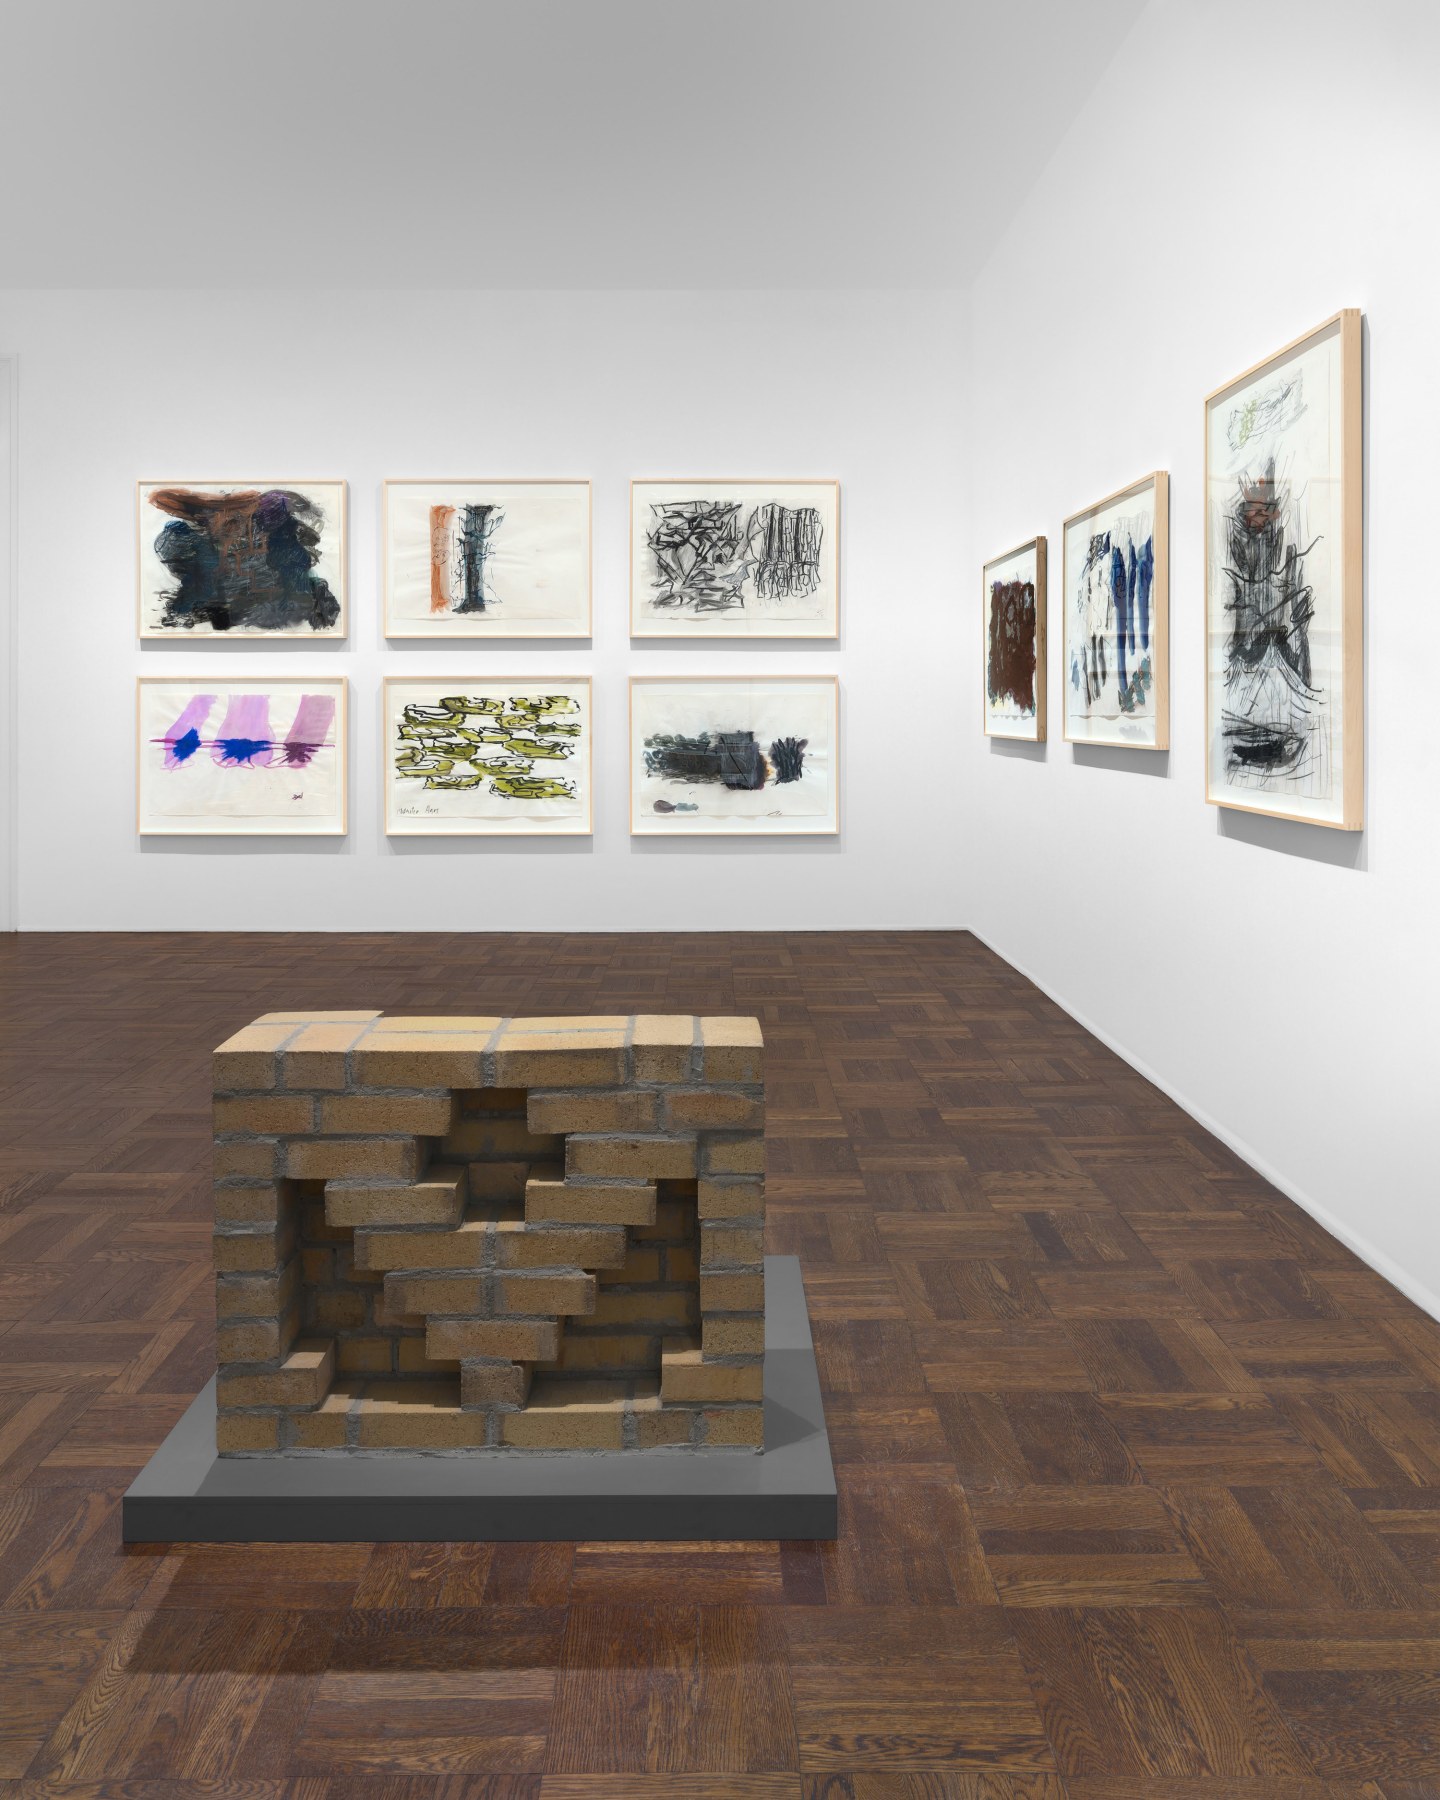 PER KIRKEBY Works on Paper, Works in Brick 20 November 2019 through 25 January 2020 UPPER EAST SIDE, NEW YORK, Installation View 5